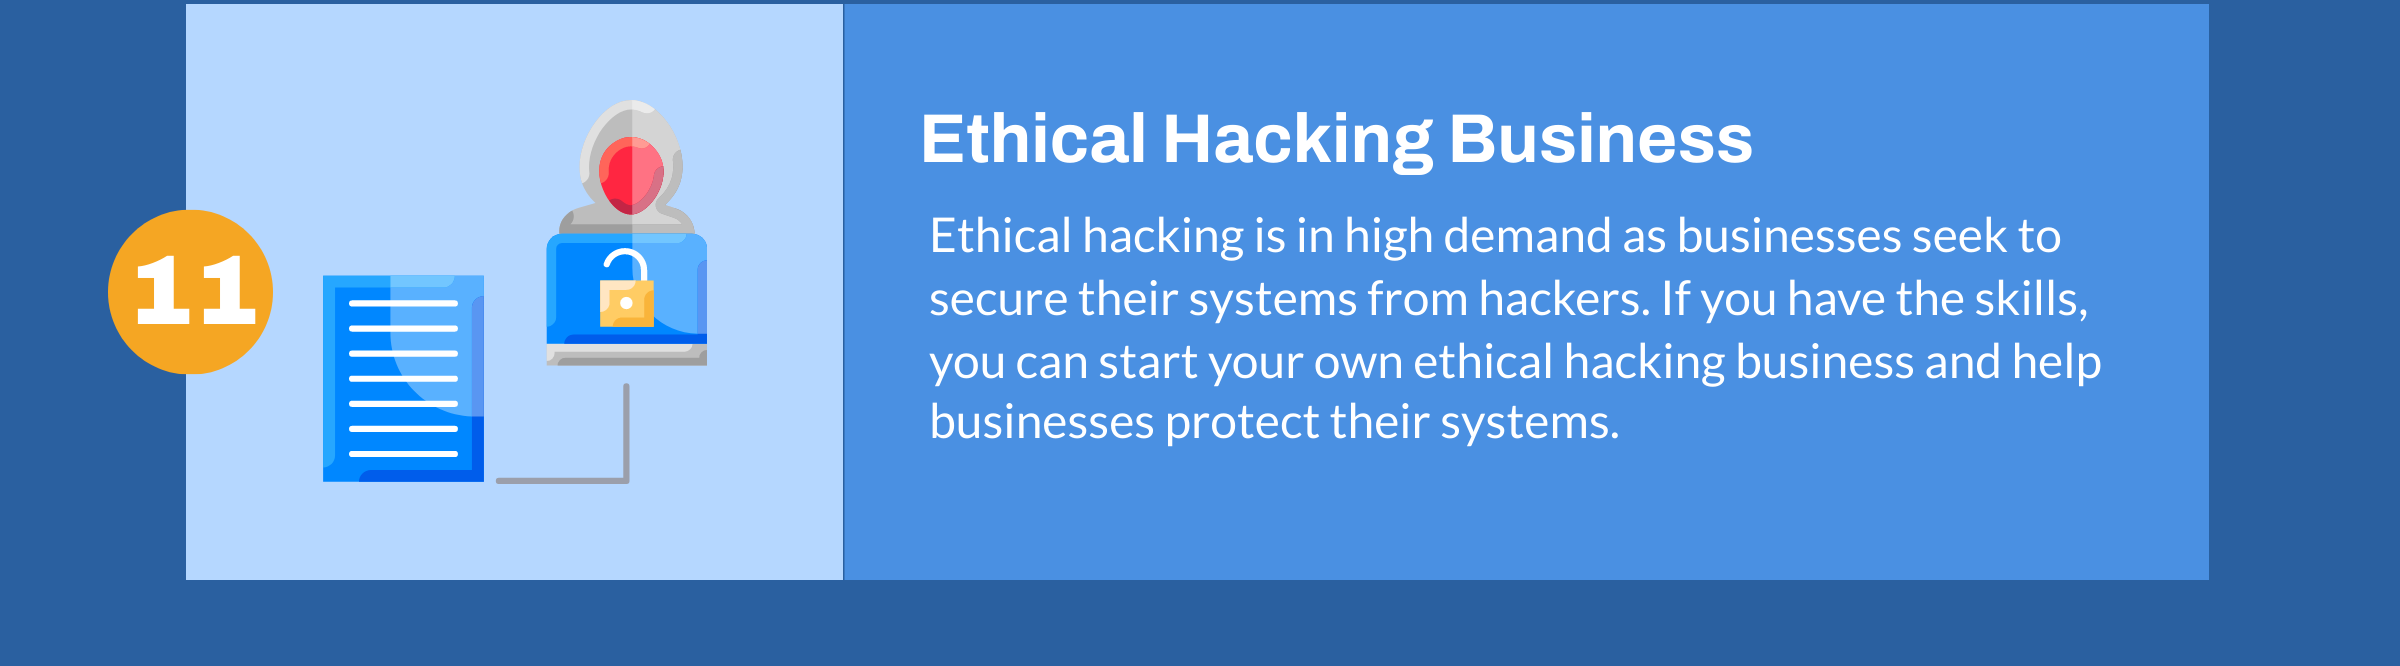 Ethical Hacking Business